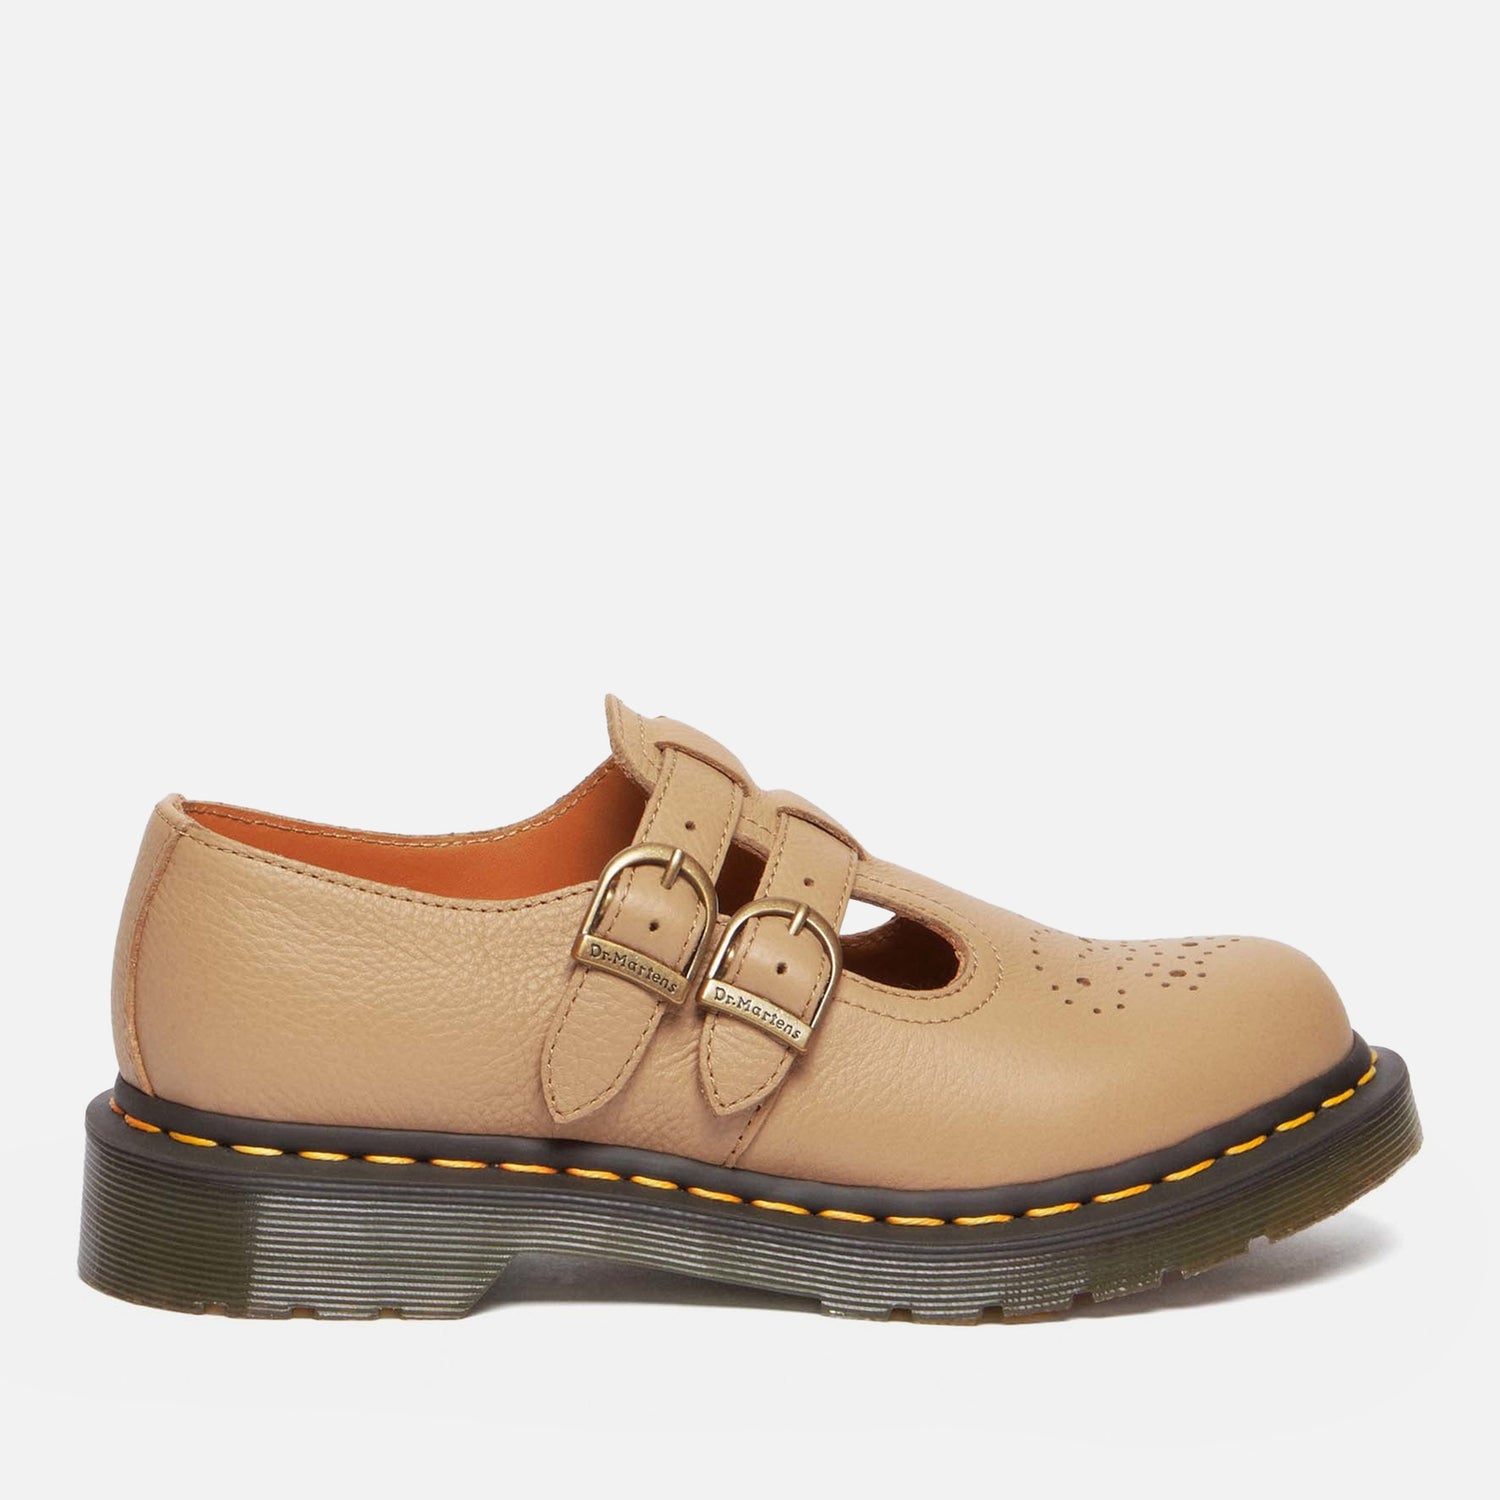 Dr. Martens 8065 Virginia Leather Mary-Jane Shoes - UK 7